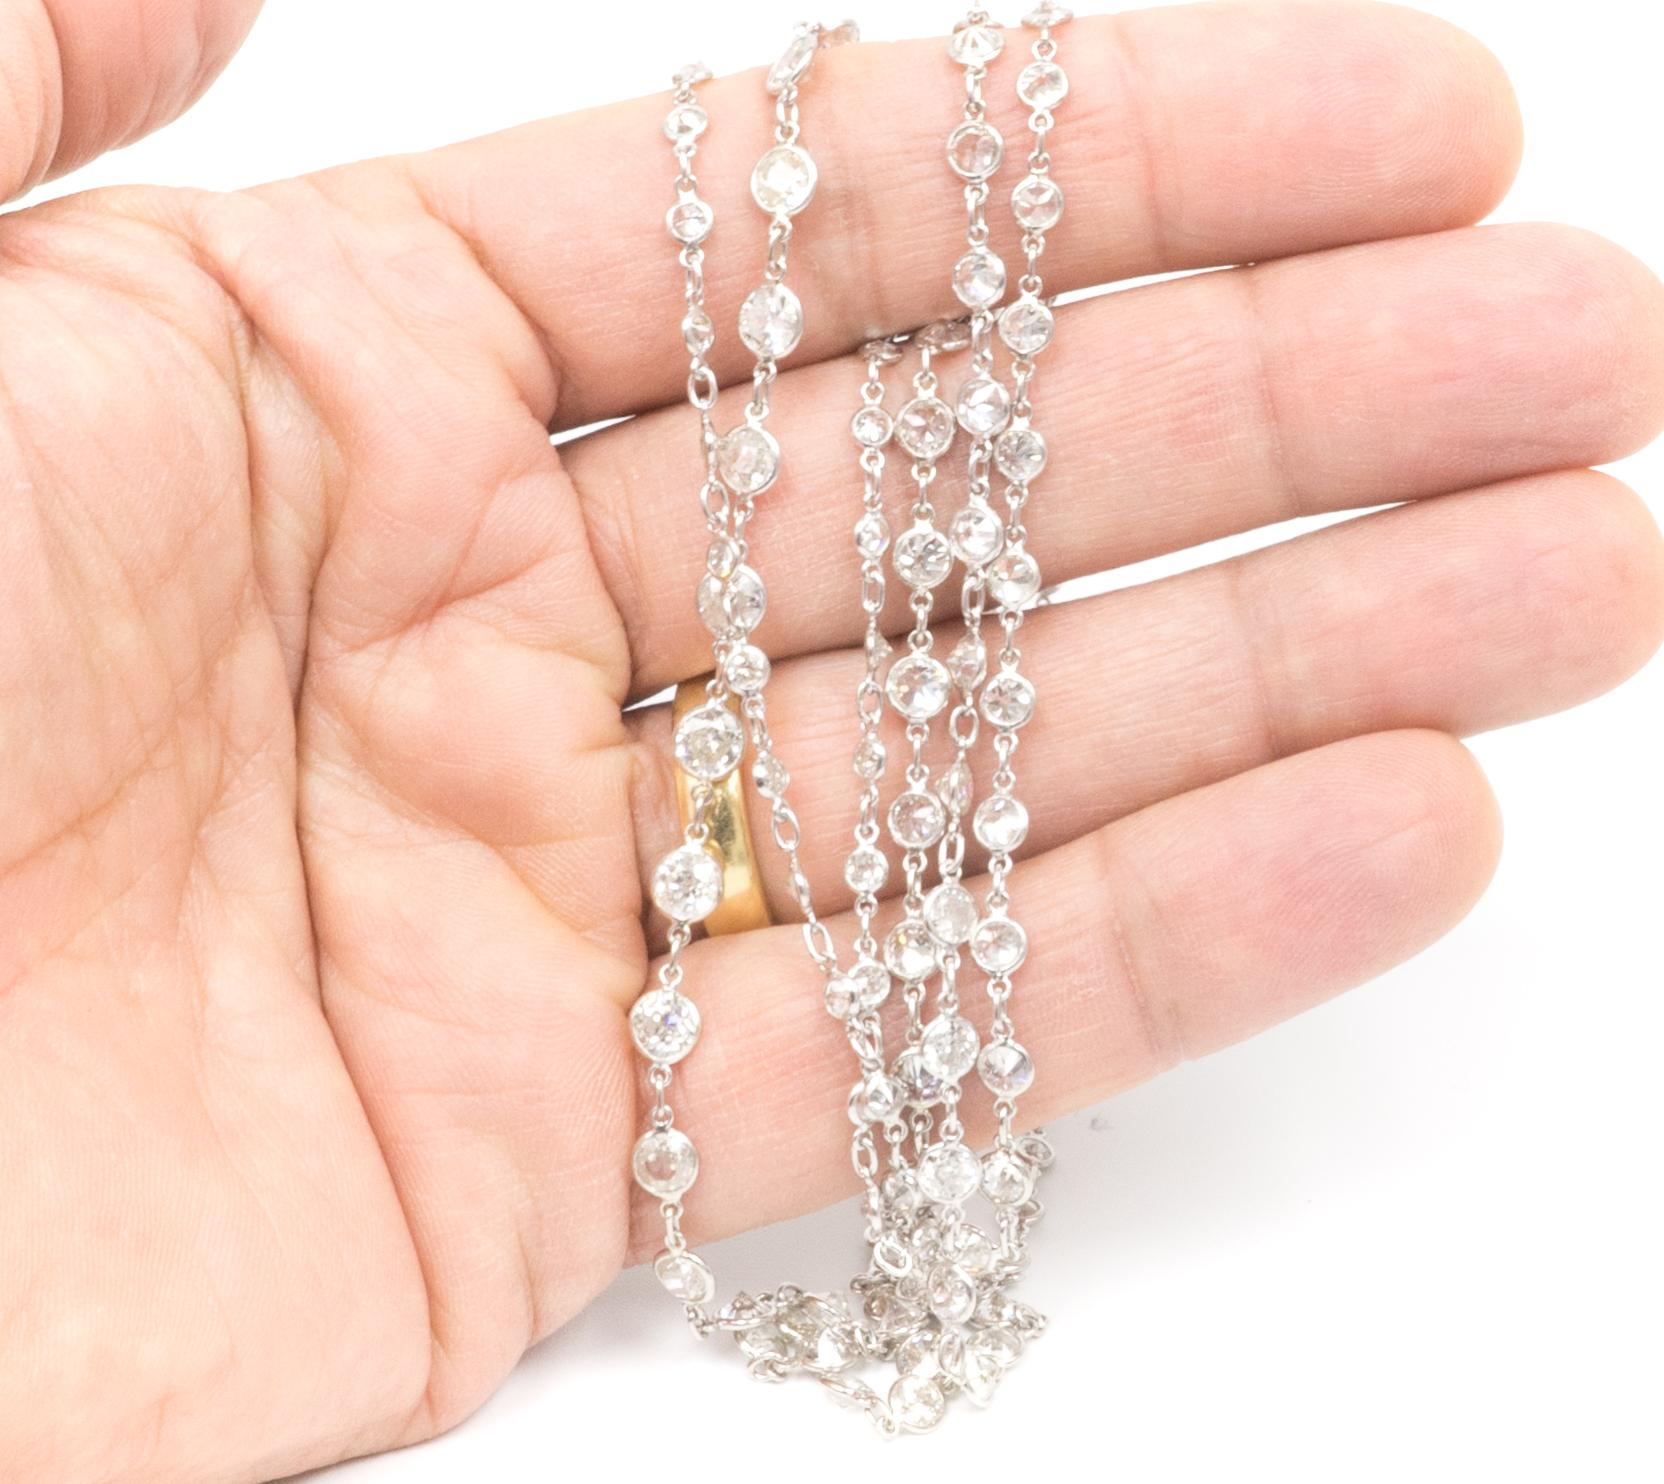 Diamonds by the yard style Handmade Necklace with 126 old mine cut Diamonds - in Platinum
43 inches long - 
Diamonds graduate from 3.0mm - 4.5 mm.   
Total diamond weight is approximately 29.50 carats total.  G-H Color, VS1-Si2
19.60 grams total. 